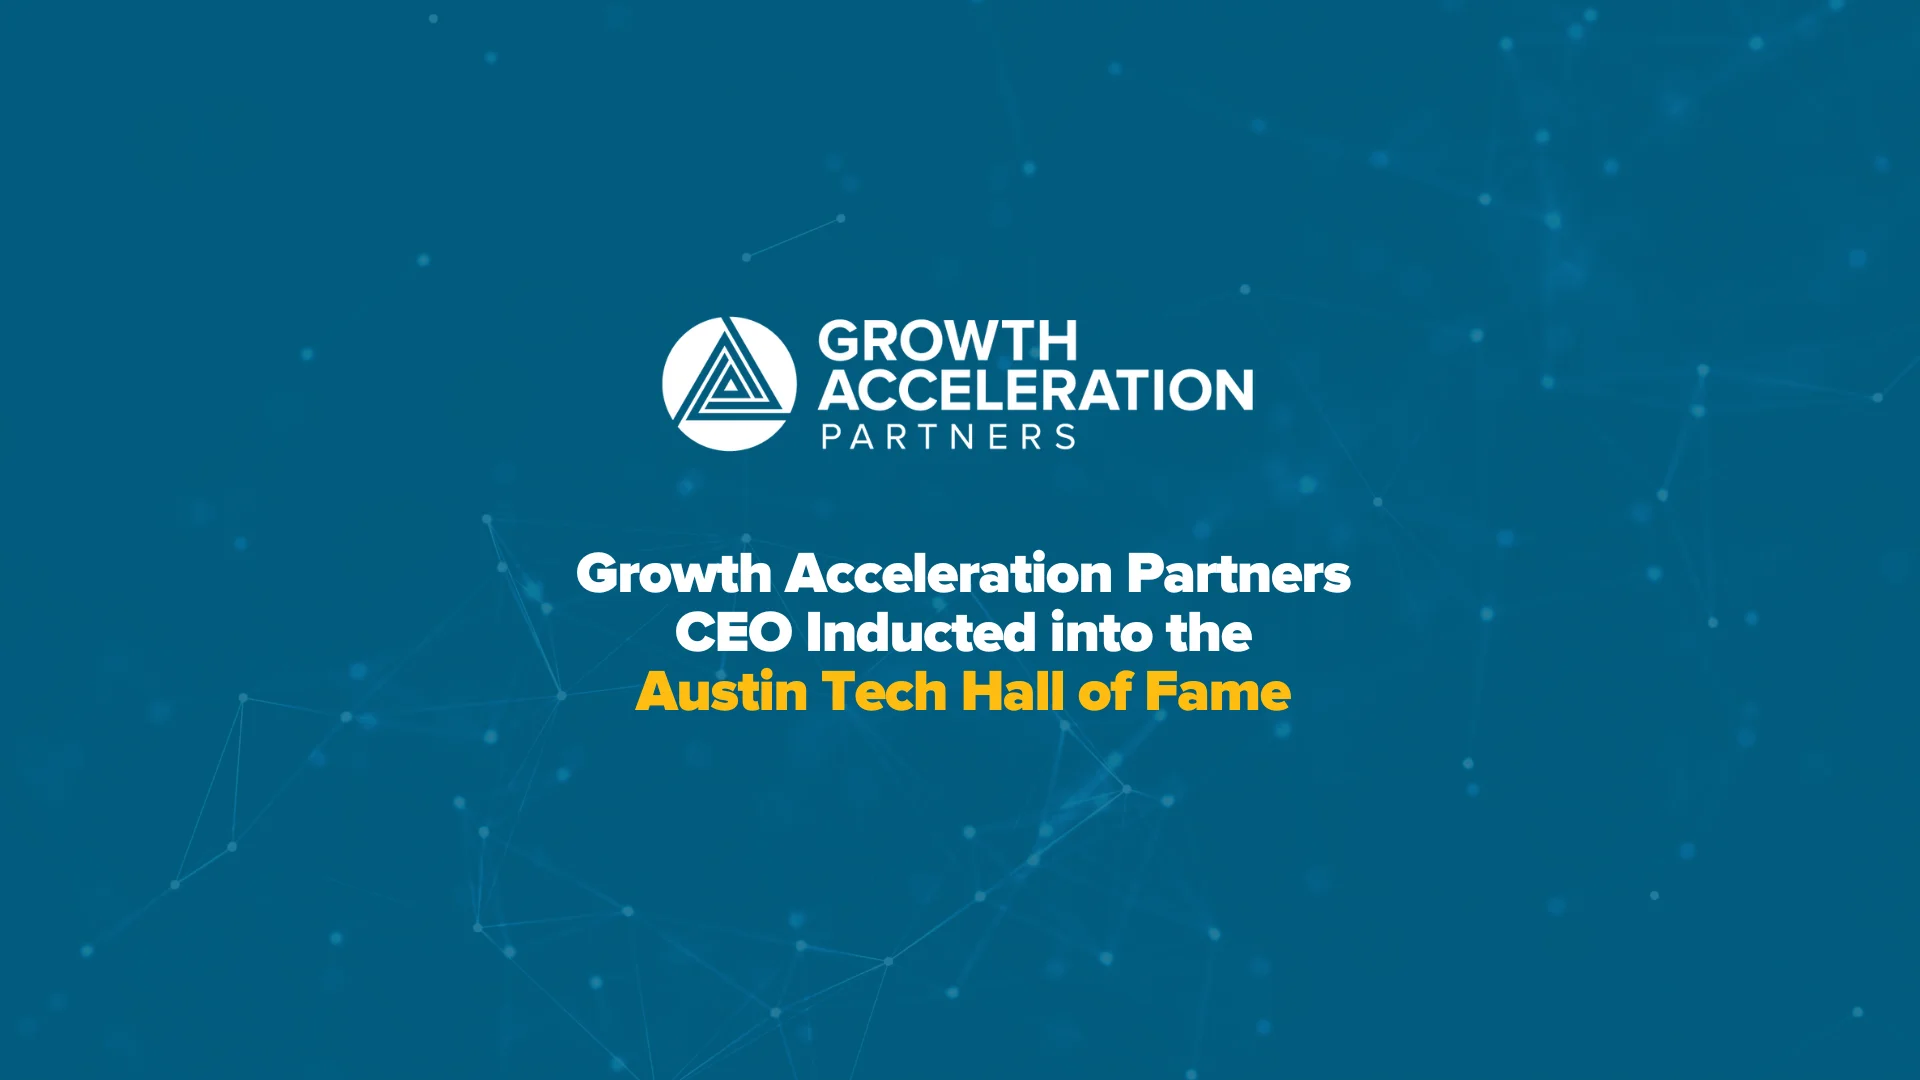 Growth Acceleration Partners CEO Inducted into the Austin Tech Hall of Fame